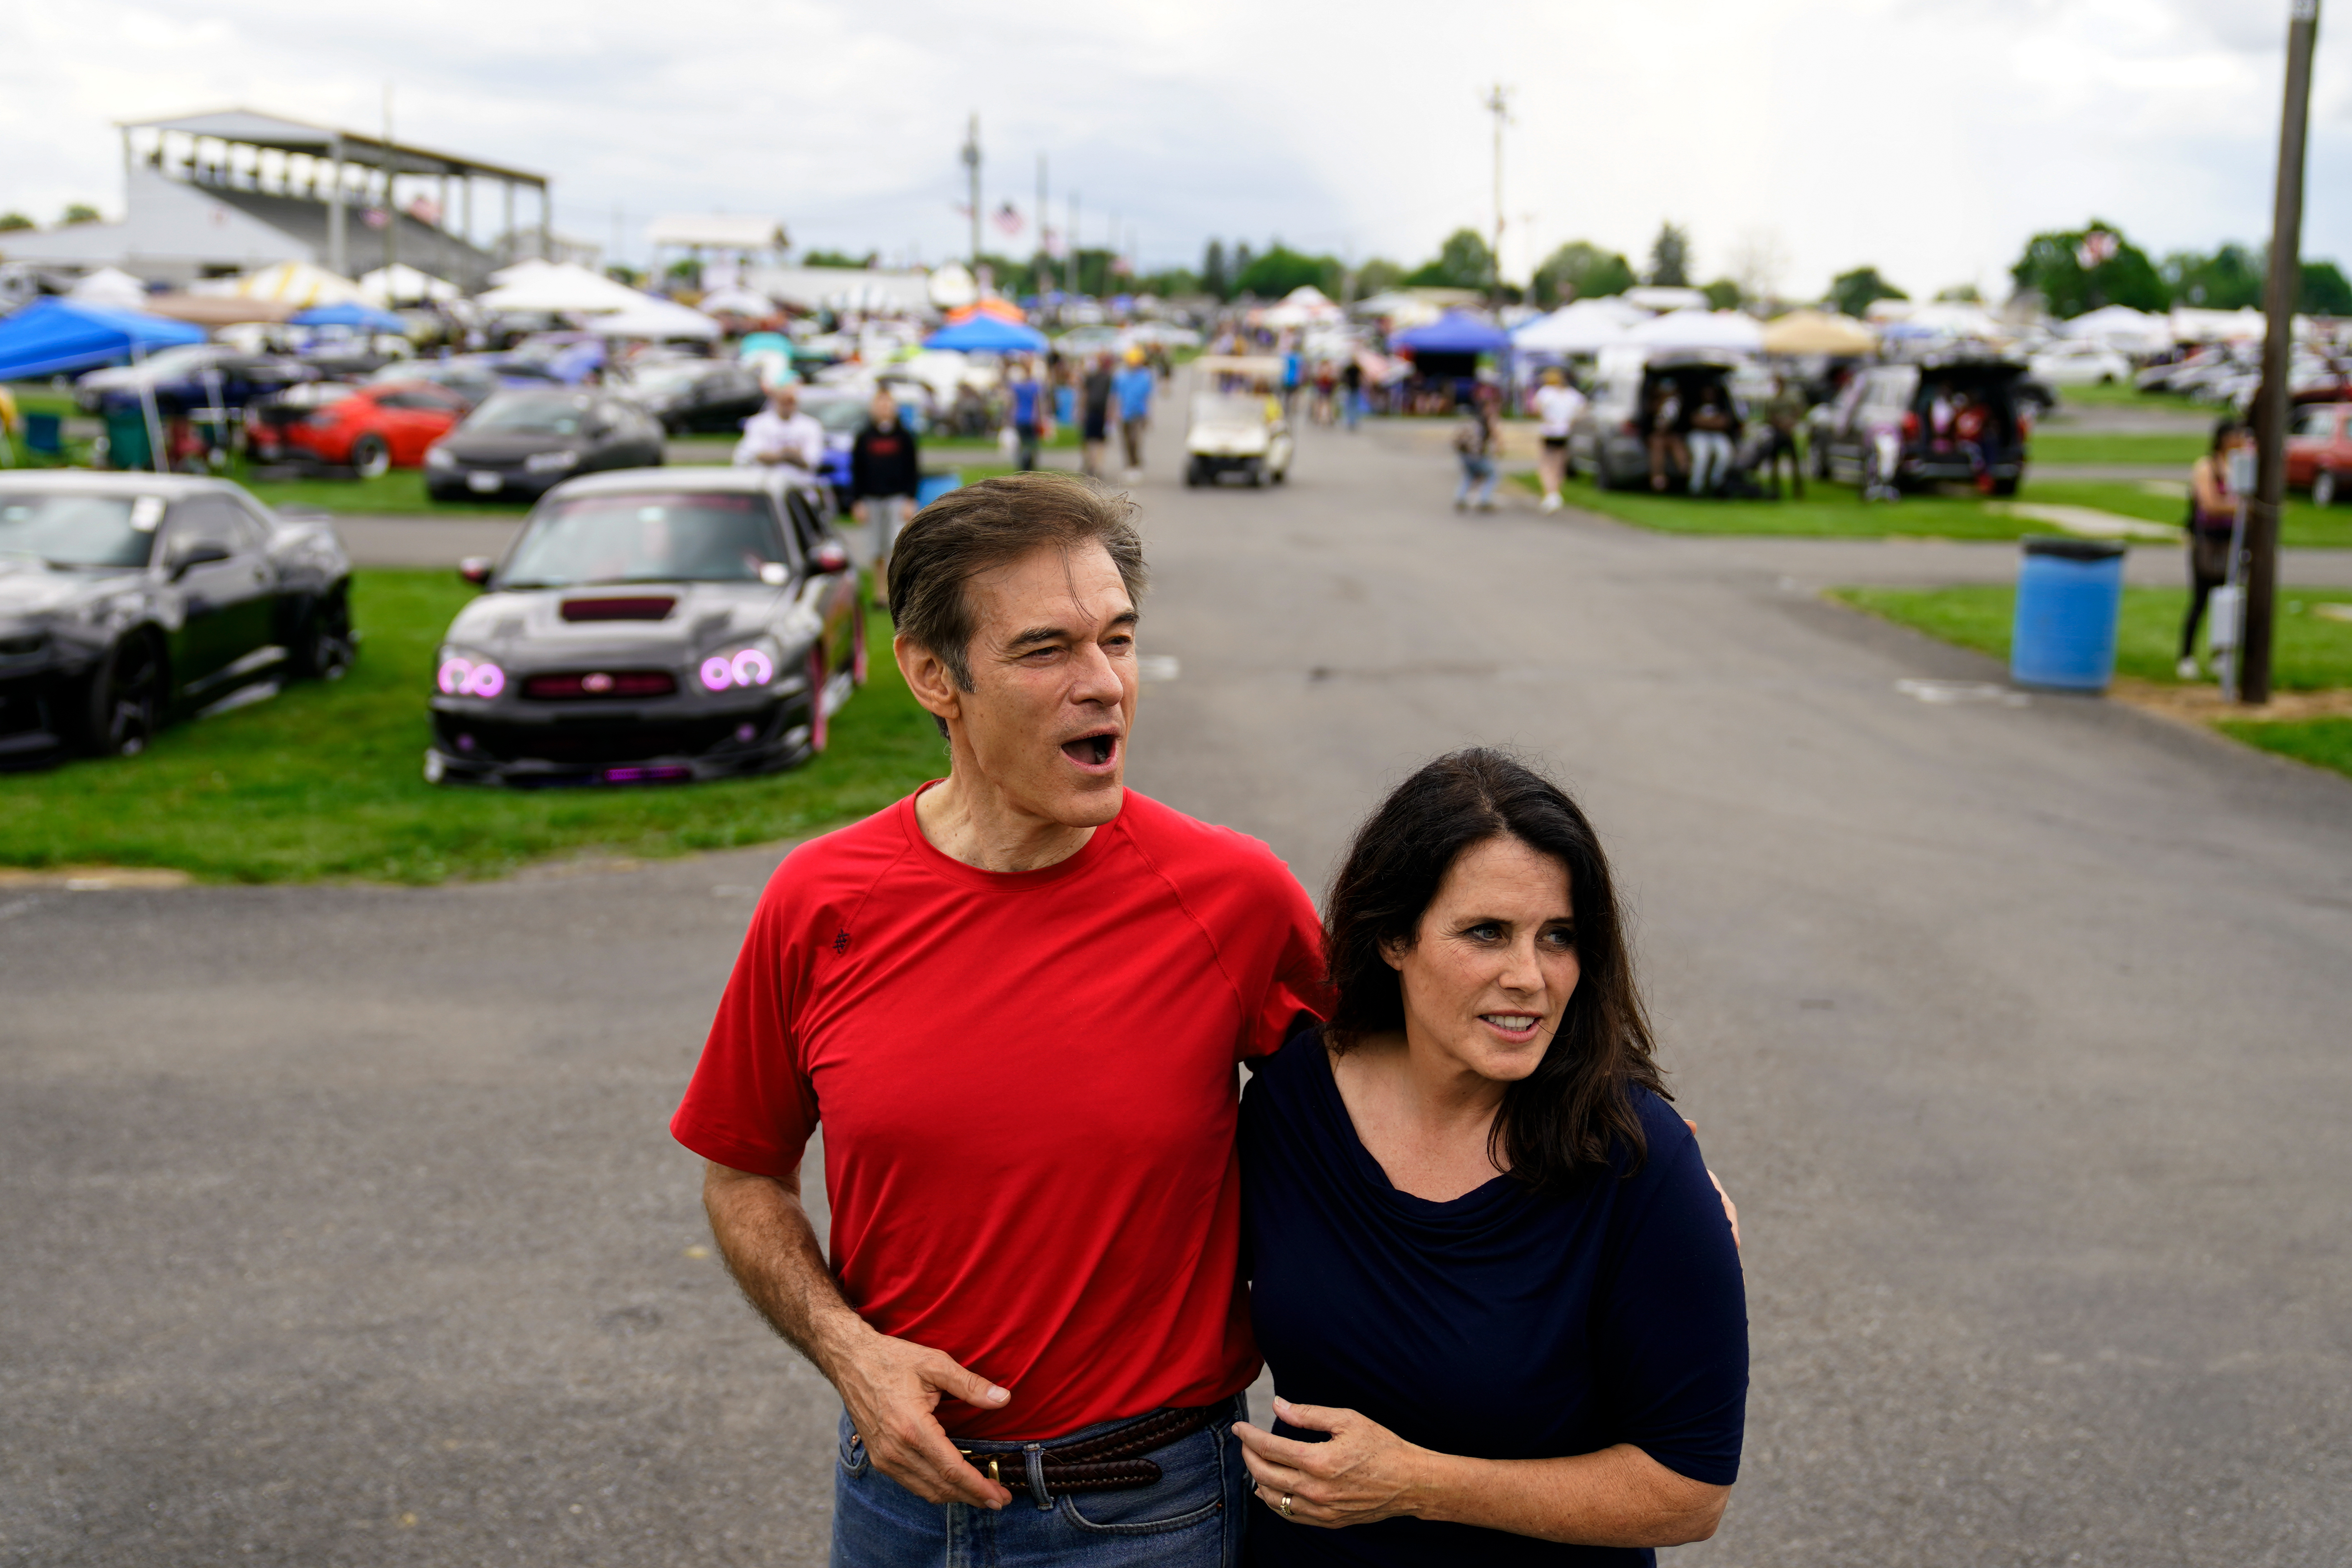 Mehmet Oz and his wife Lisa during their visit to a car show in Carlisle, Pa., on Saturday, May 14. 